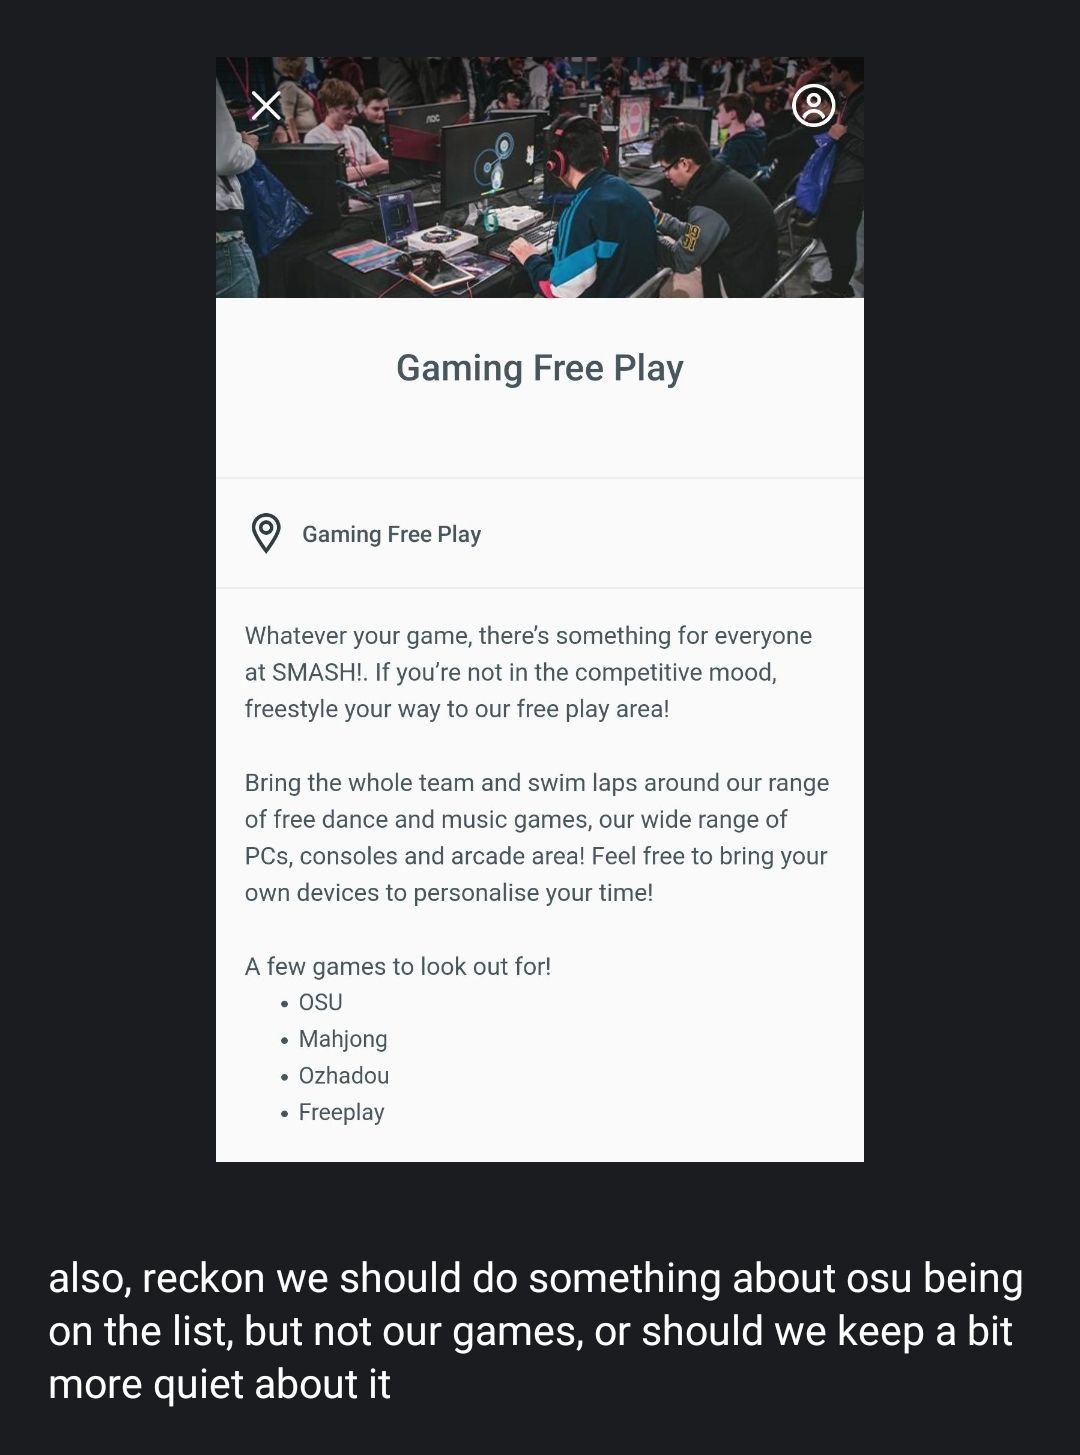 A screenshot of the Gaming Free Play entry as seen in the SMASH! Guidebook app. Of note is that it doesn’t mention our games.